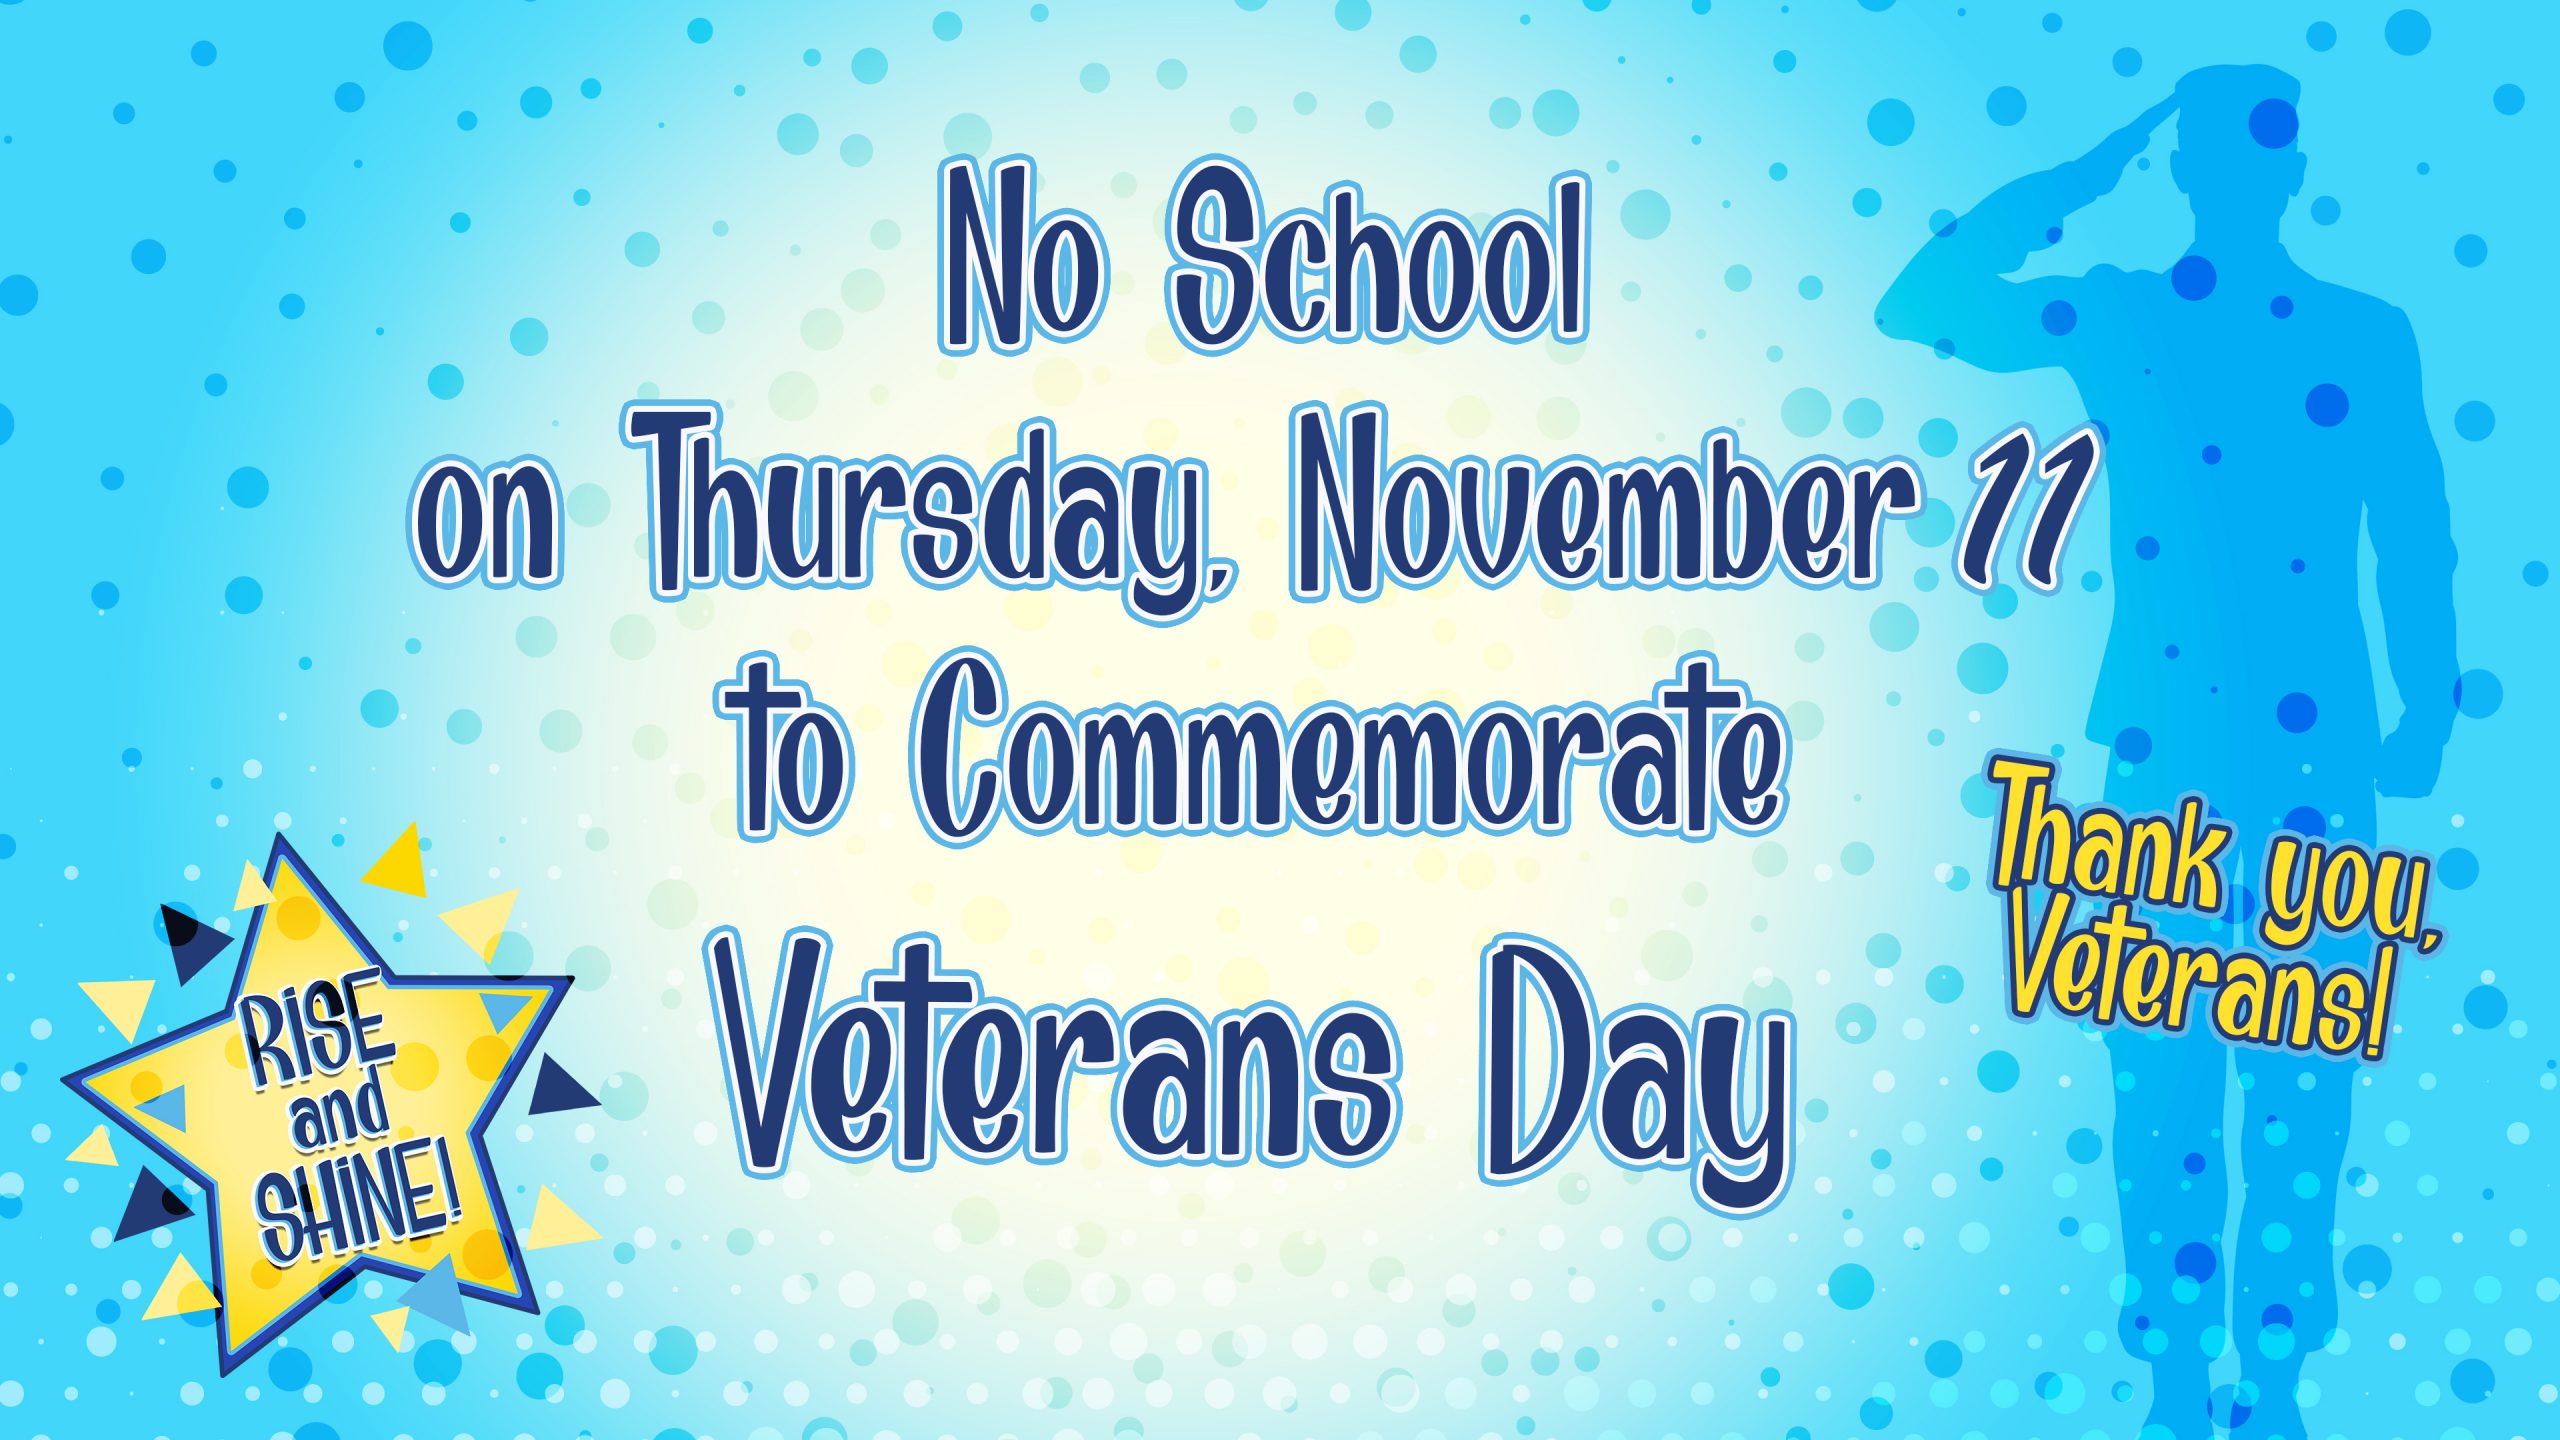 We see a light blue screen with many dots in diffferent sizes and color ranging from white, light blue and dark blue. There is a white spot in center of screen with text that reads “No School on Thursday, November 11 to Commemorate Veterans Day”. There is Rise and Shine logo on bottom left. We see a see through silhouette of an army saluting. There is a yellow text down below it reading “Thank you, Veterans!”.